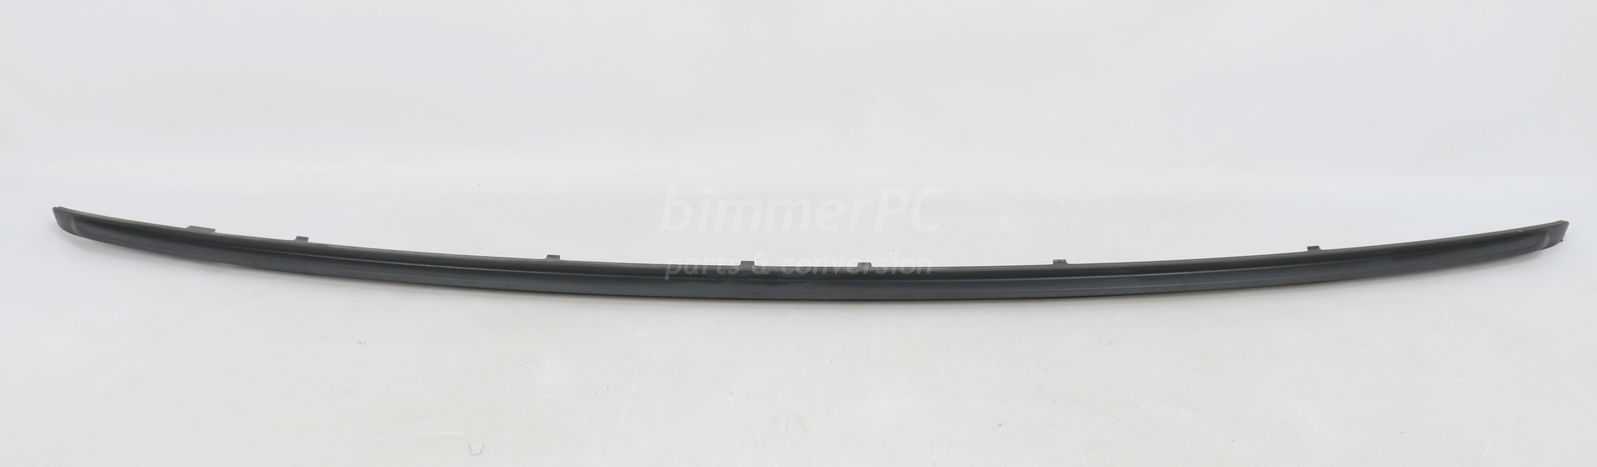 Picture of BMW 51127135580 Rear Bumper Lower Finisher Trim Strip Moulding E65 E66 Late for sale